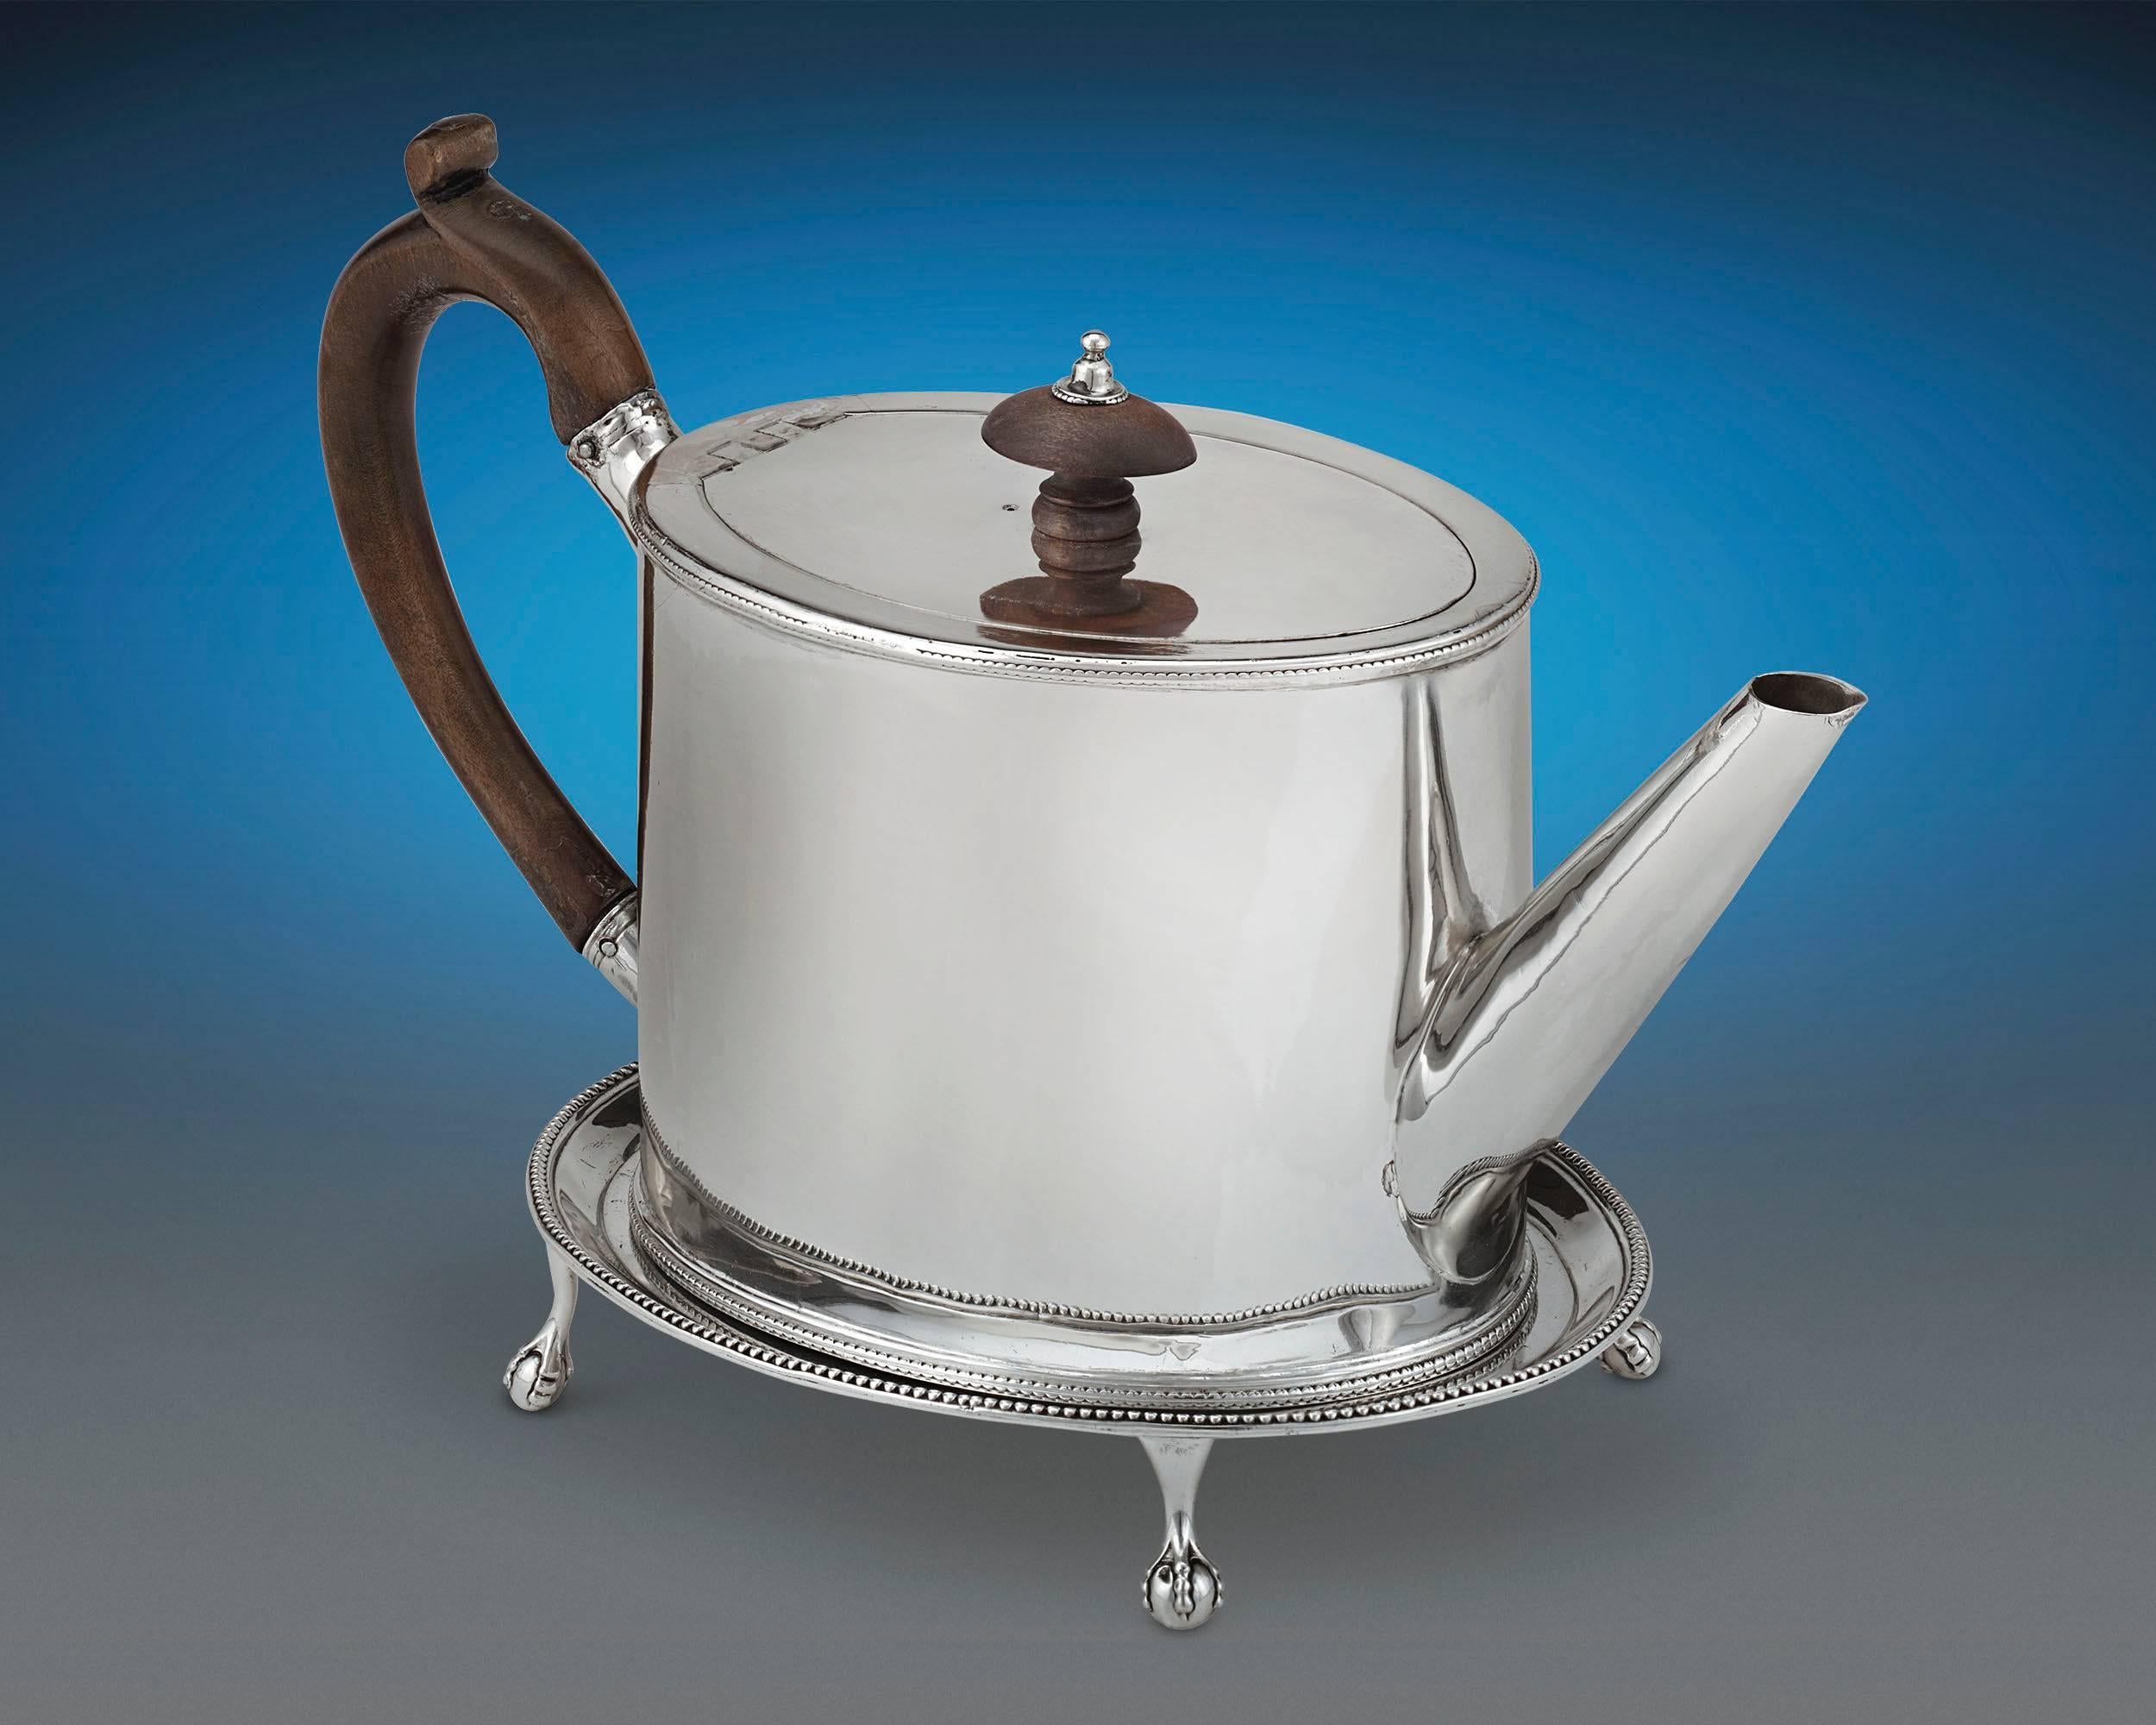 Refined specimens of Georgian sophistication, this beautiful Georgian silver teapot and waiter set was crafted by Hester Bateman, the famed English female silversmith. Each piece reflects the legendary smith's uncanny eye for elegance, with her